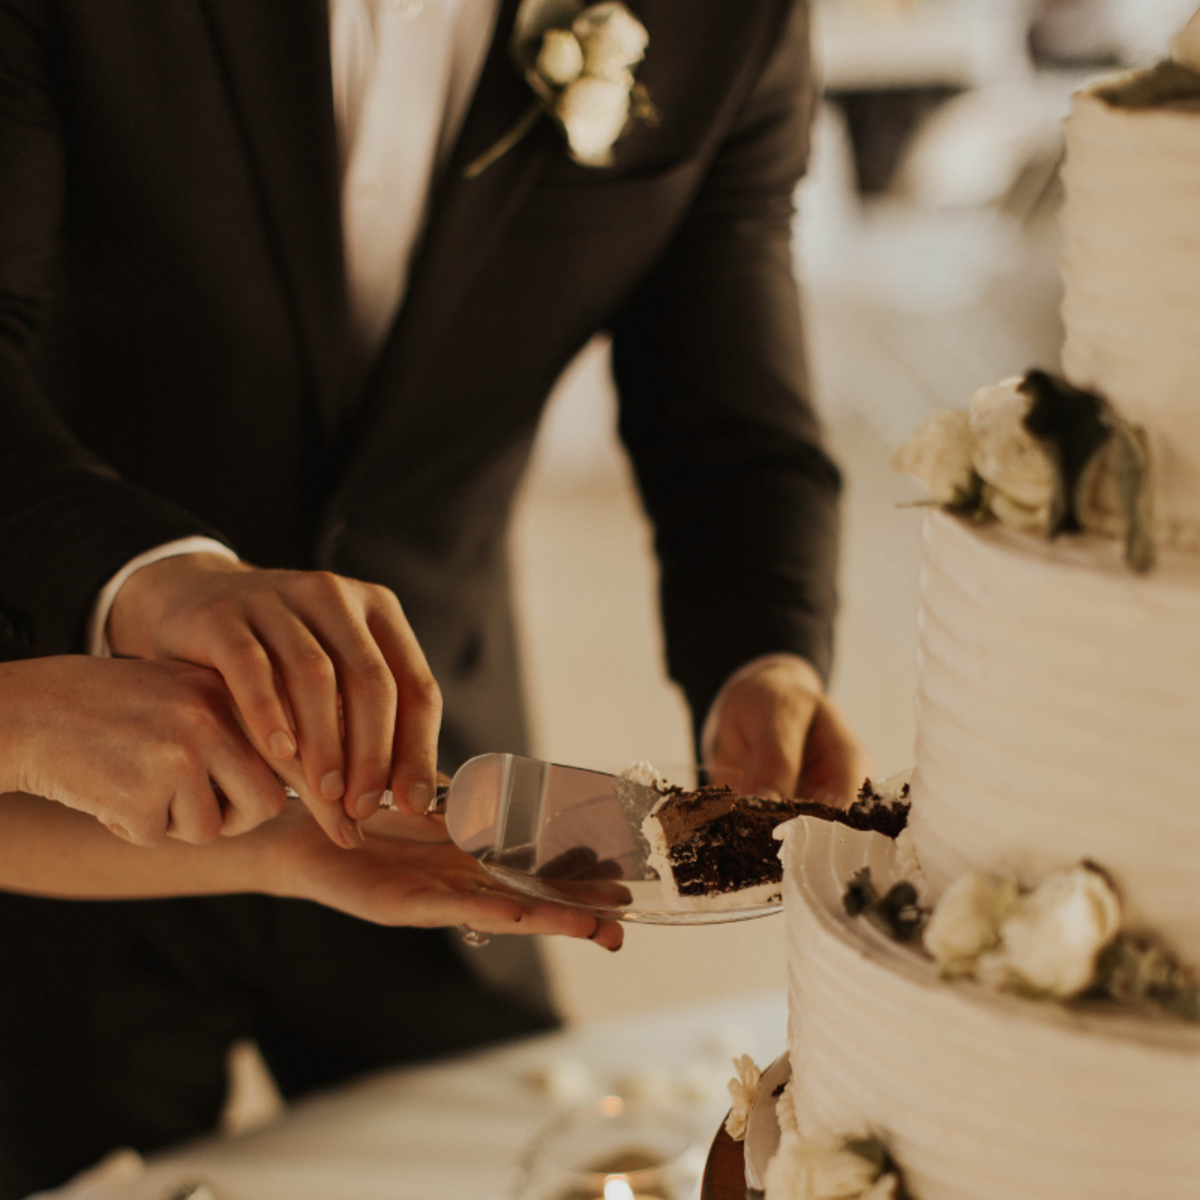 At many receptions, the newlywed couple cut their wedding cake hand-in-hand before it is served to the guests. 